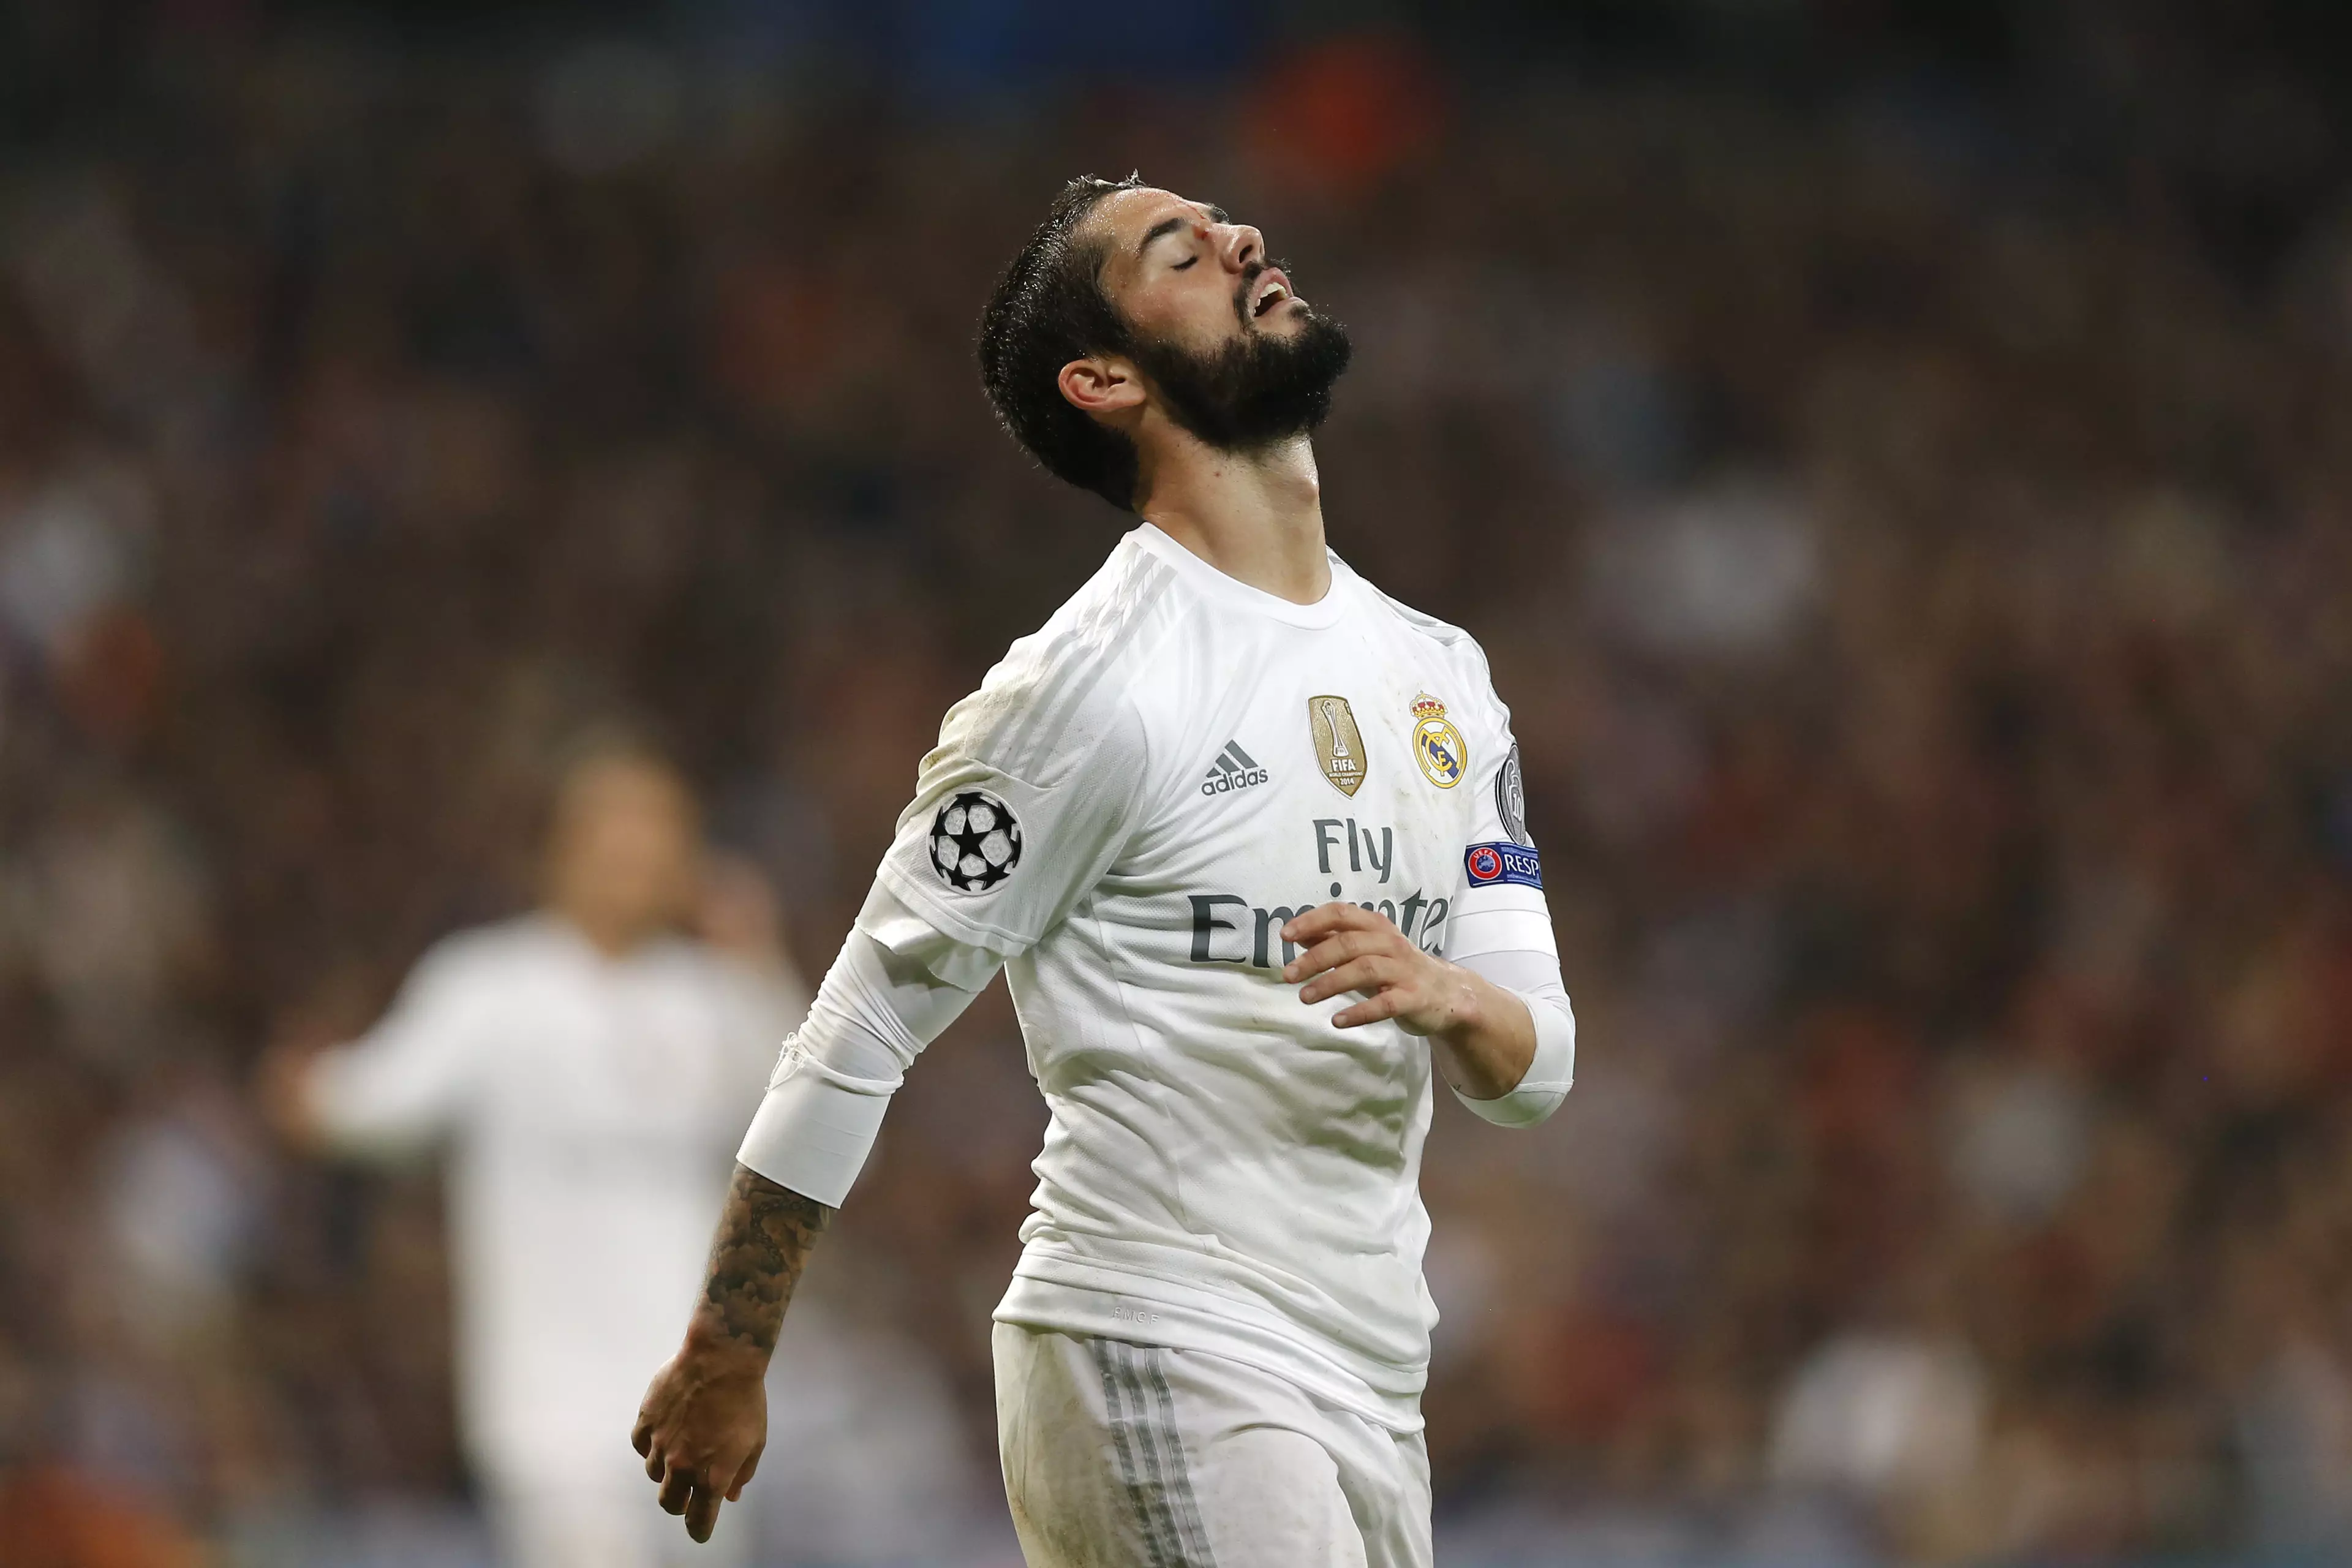 Is Isco right about missing Ronaldo? Image: PA Images